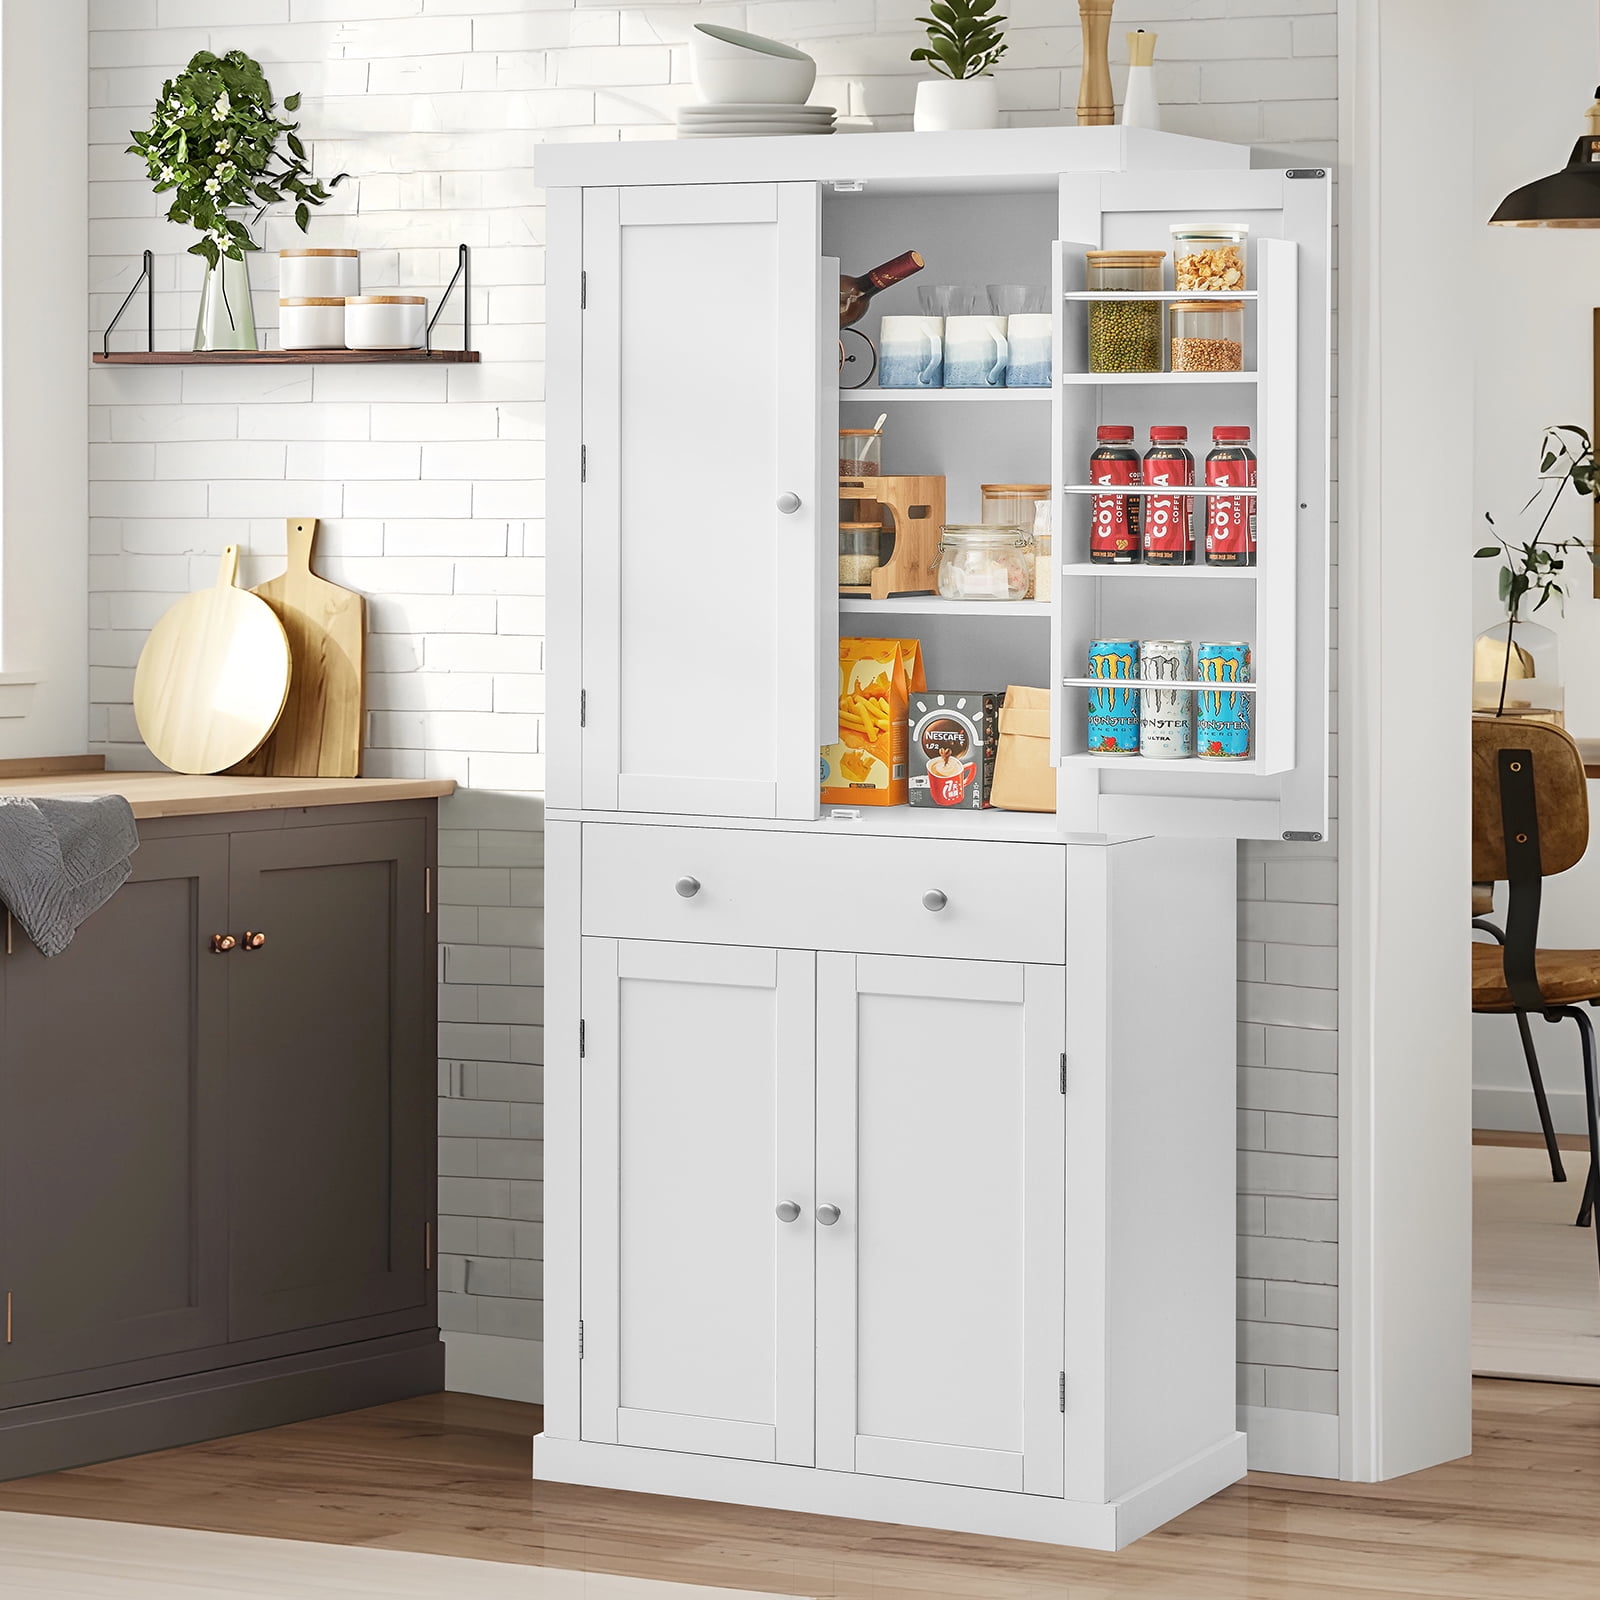 72''H Freestanding Tall Pantry Cabinet Kitchen Storage Cabinet in